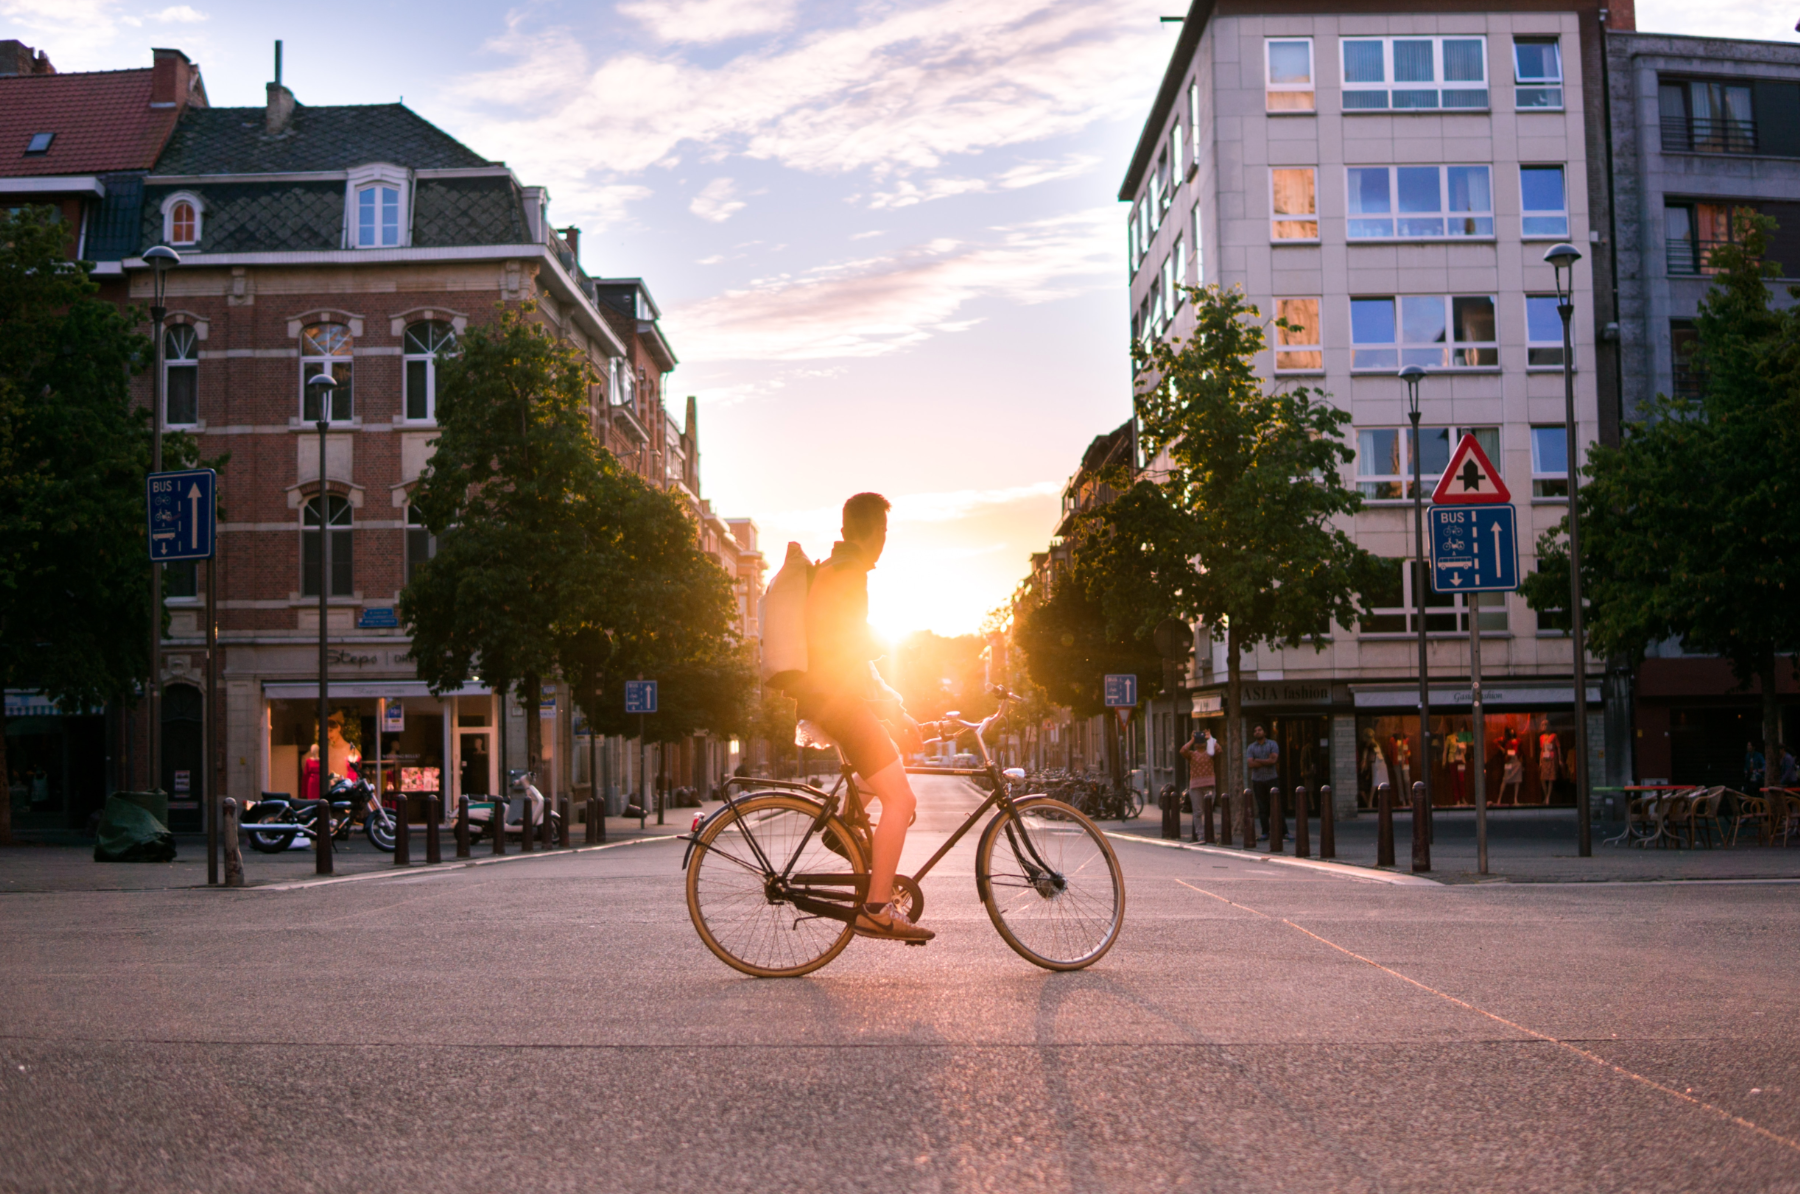 Cycling in the city at sunset.